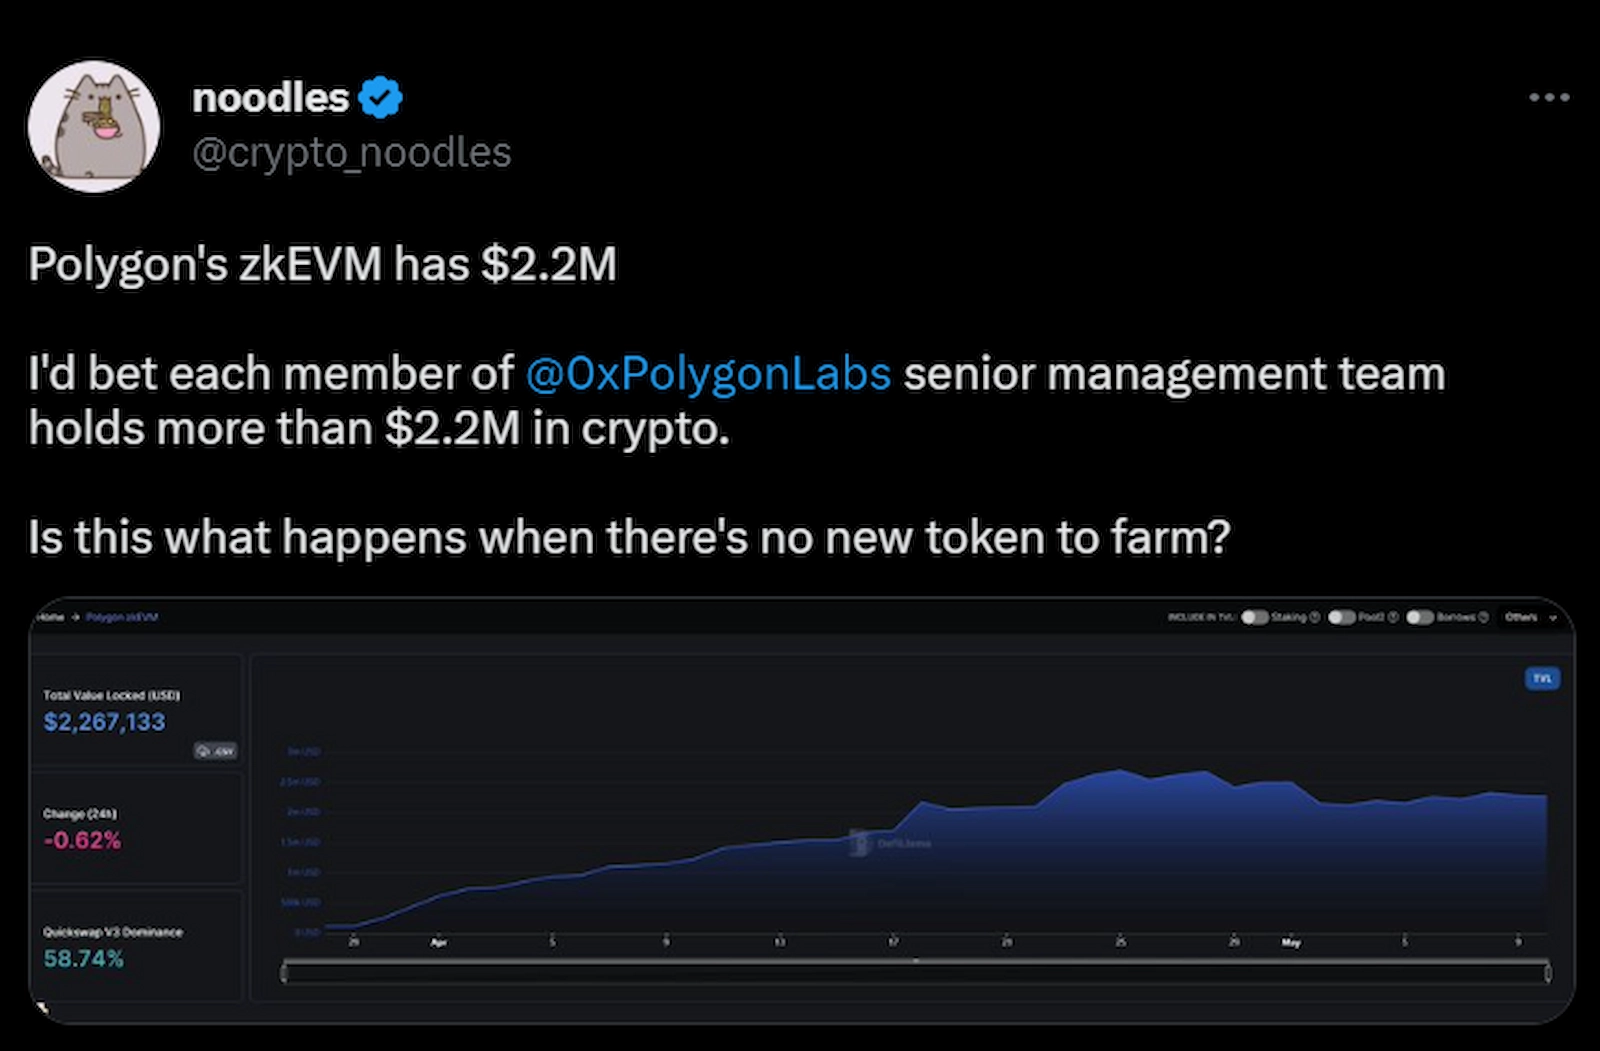 Twitter user 'noodles' questioned the slow growth of TVL Polygon zkEVM